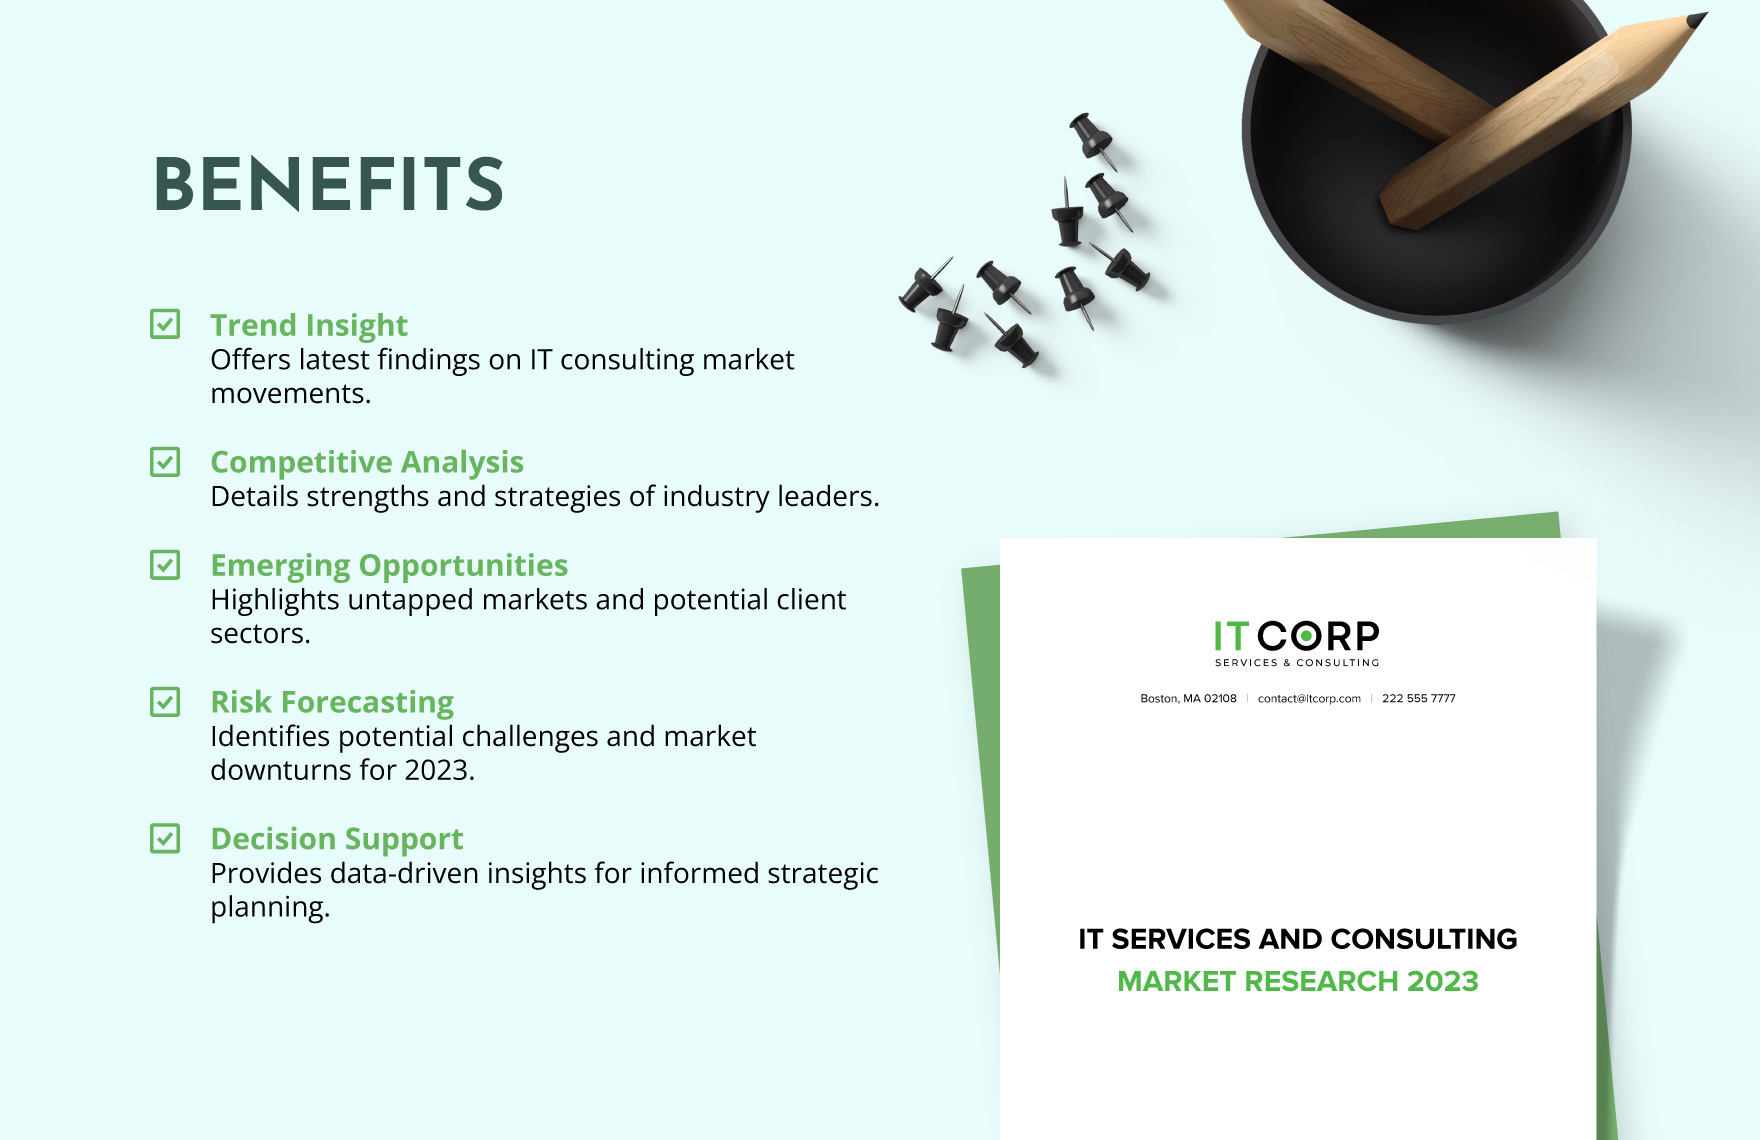 IT Services and Consulting Market Research 2023